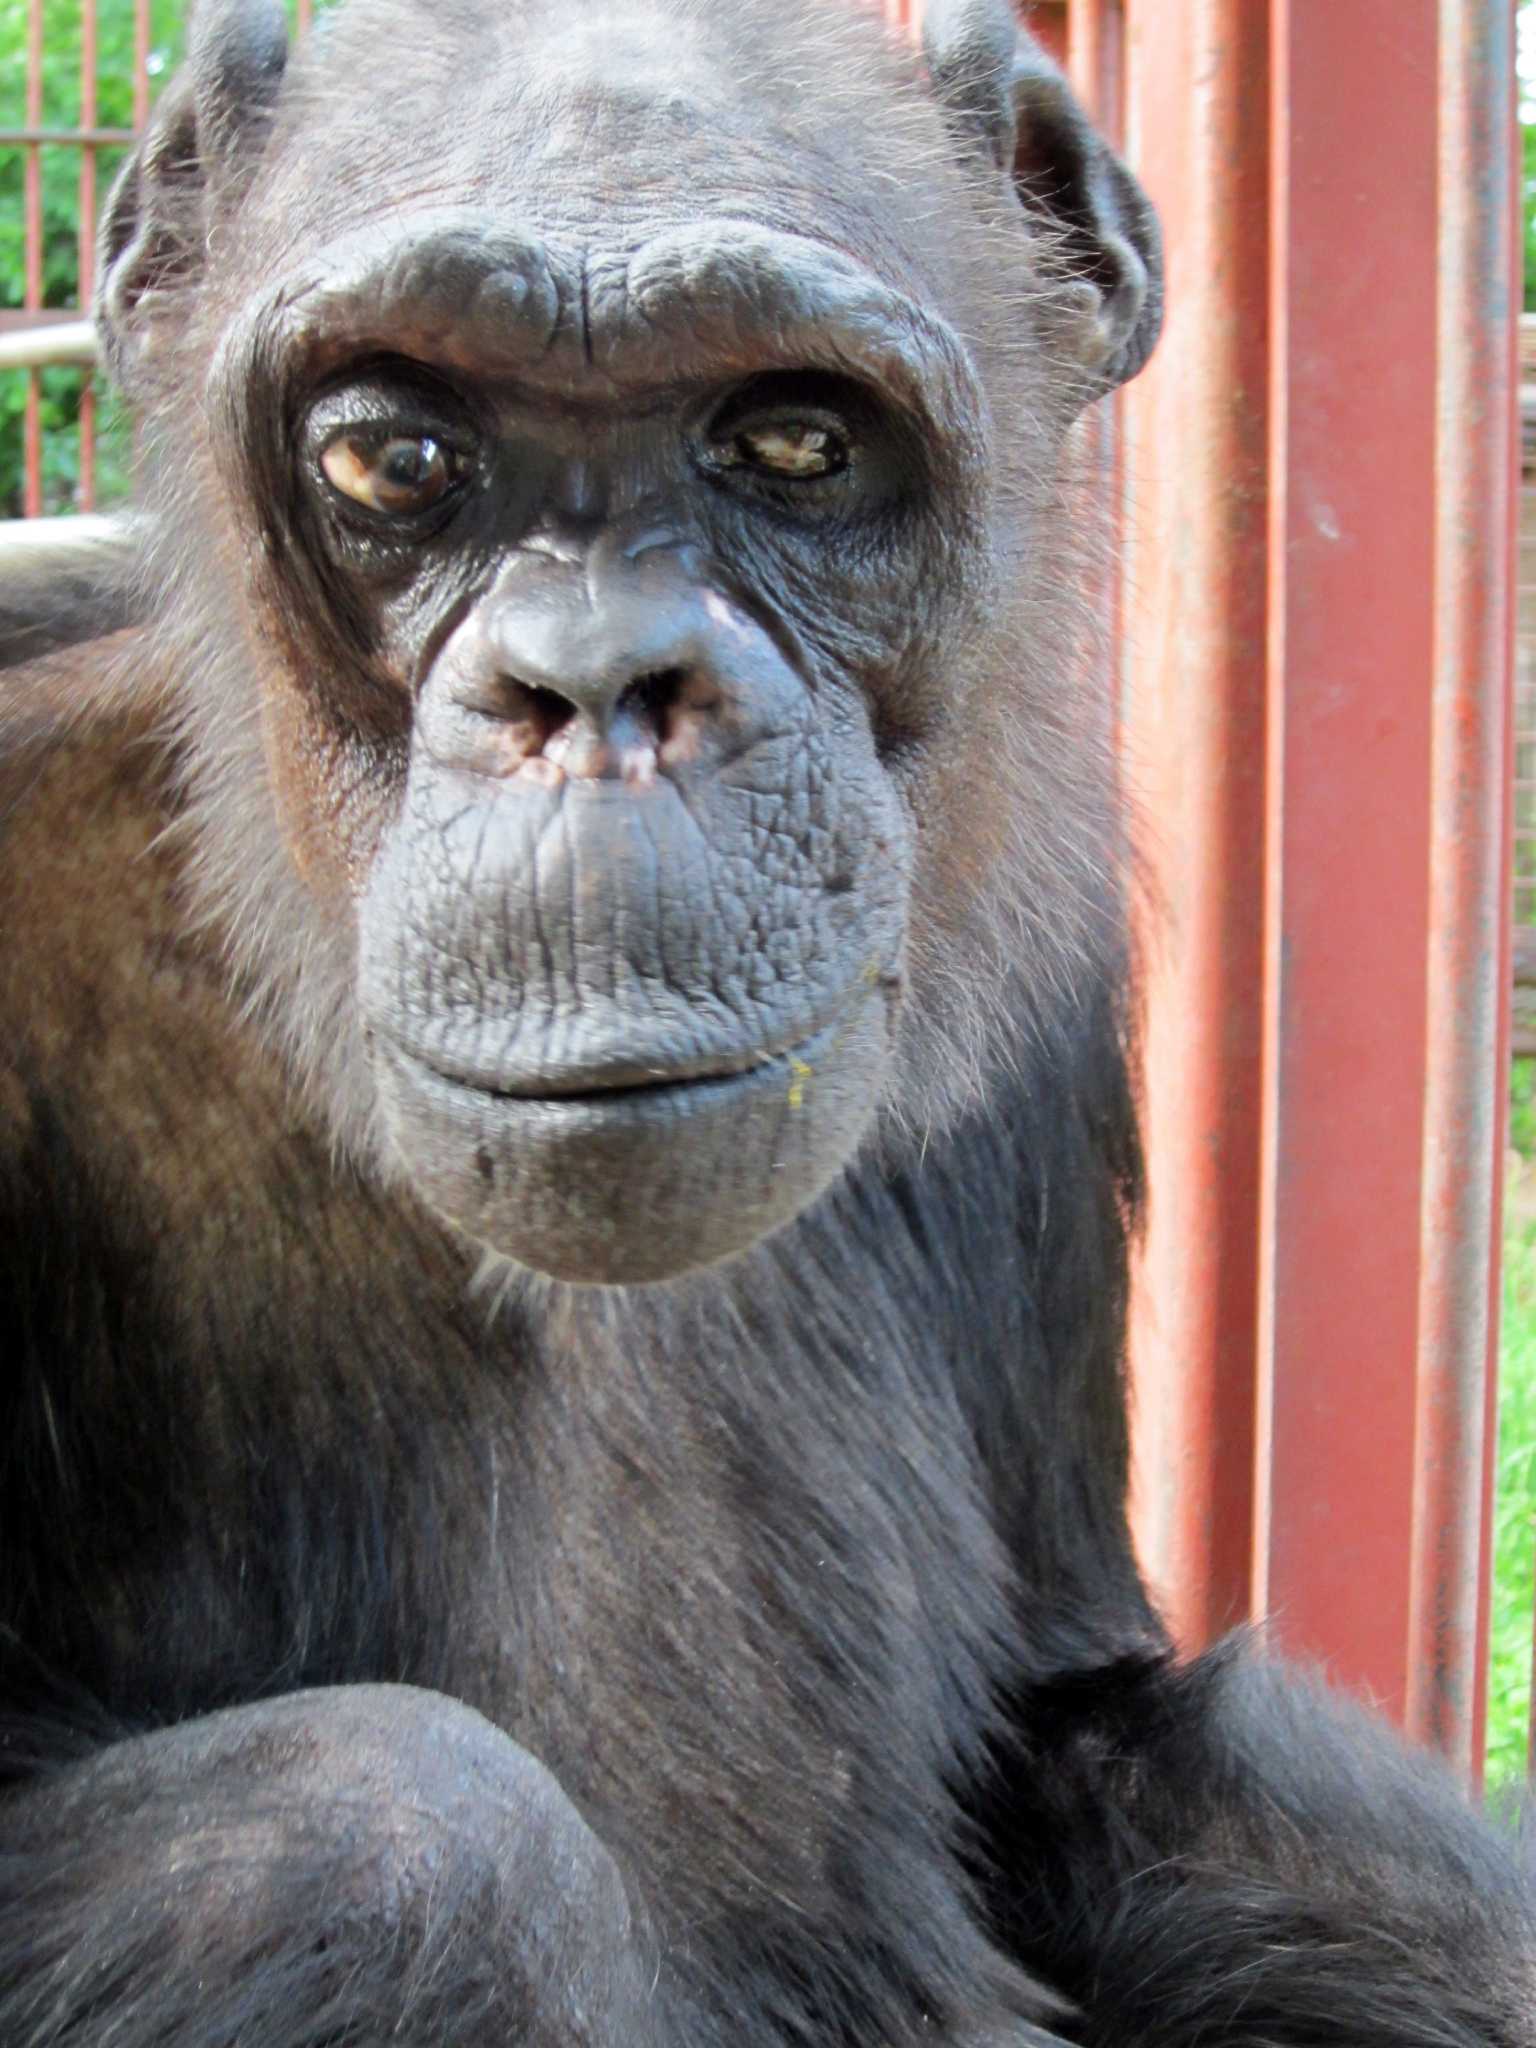 Oliver, chimpanzee with humanlike traits, dies - Houston Chronicle1536 x 2048